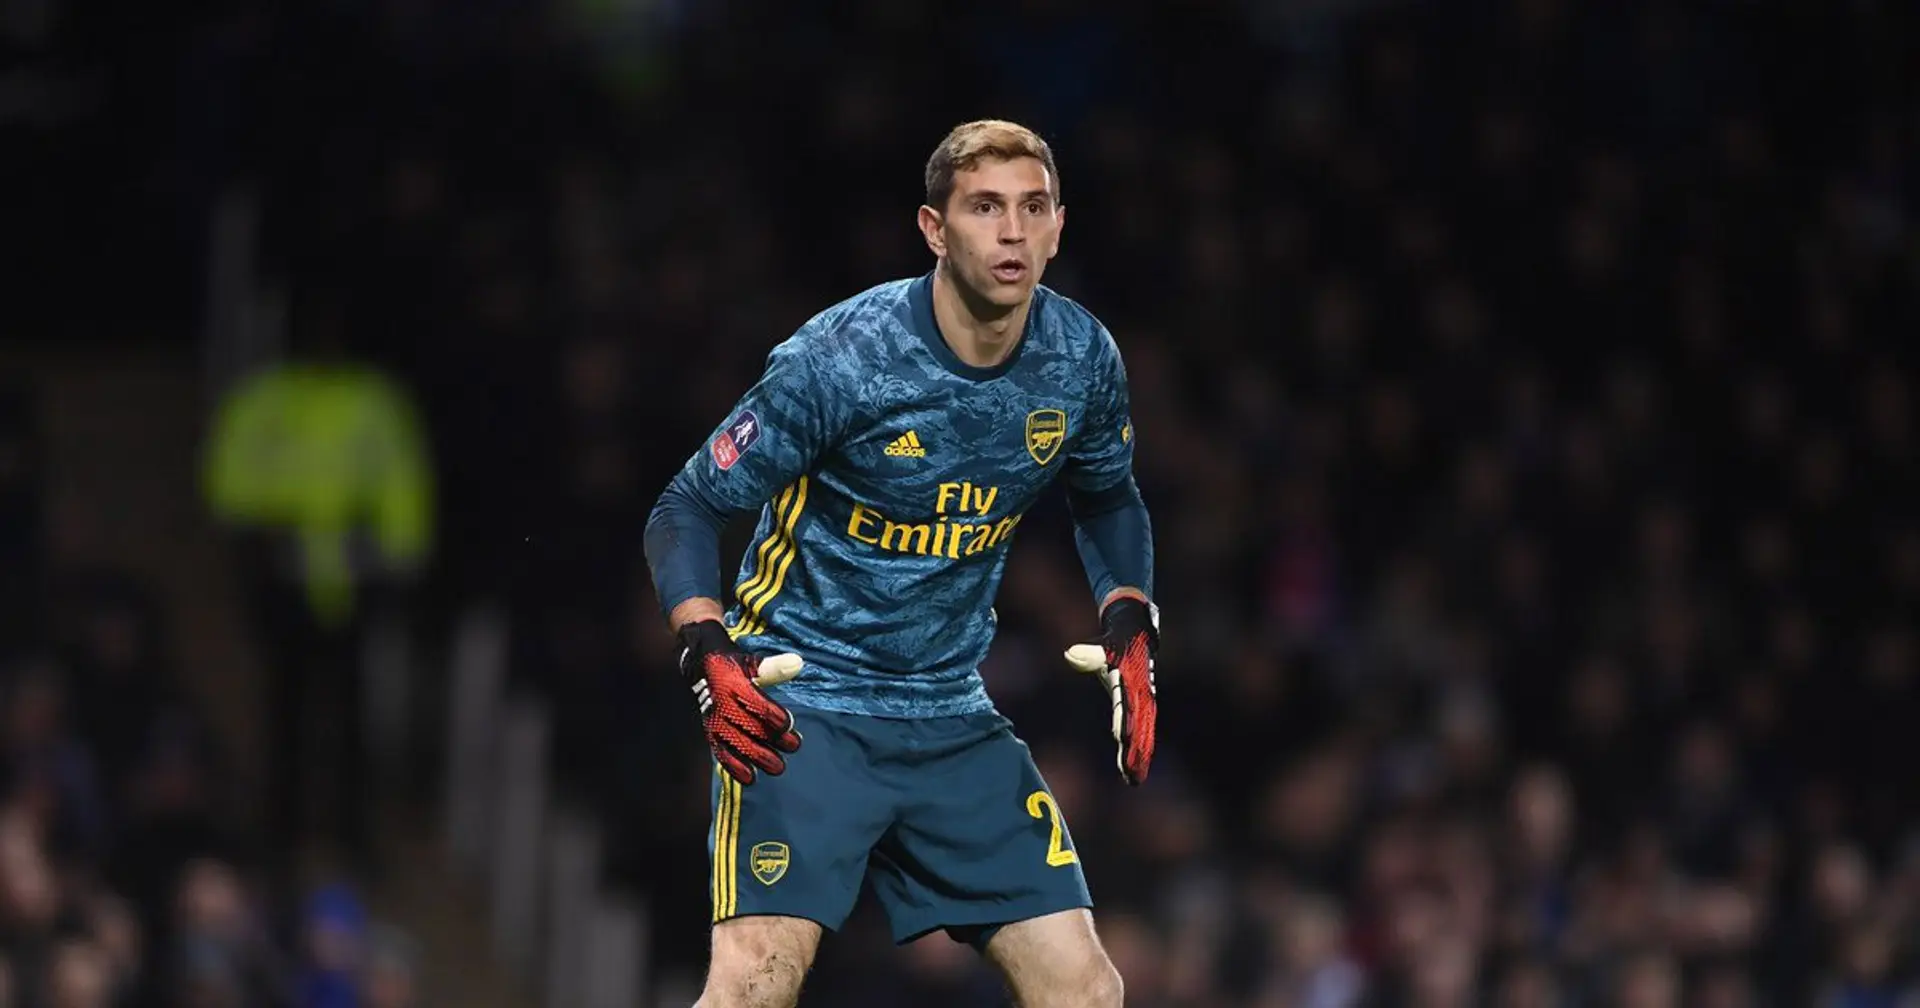 Arsenal pay €500,000 bonus for Emiliano Martinez purchase after snubbing Independiente claims in November